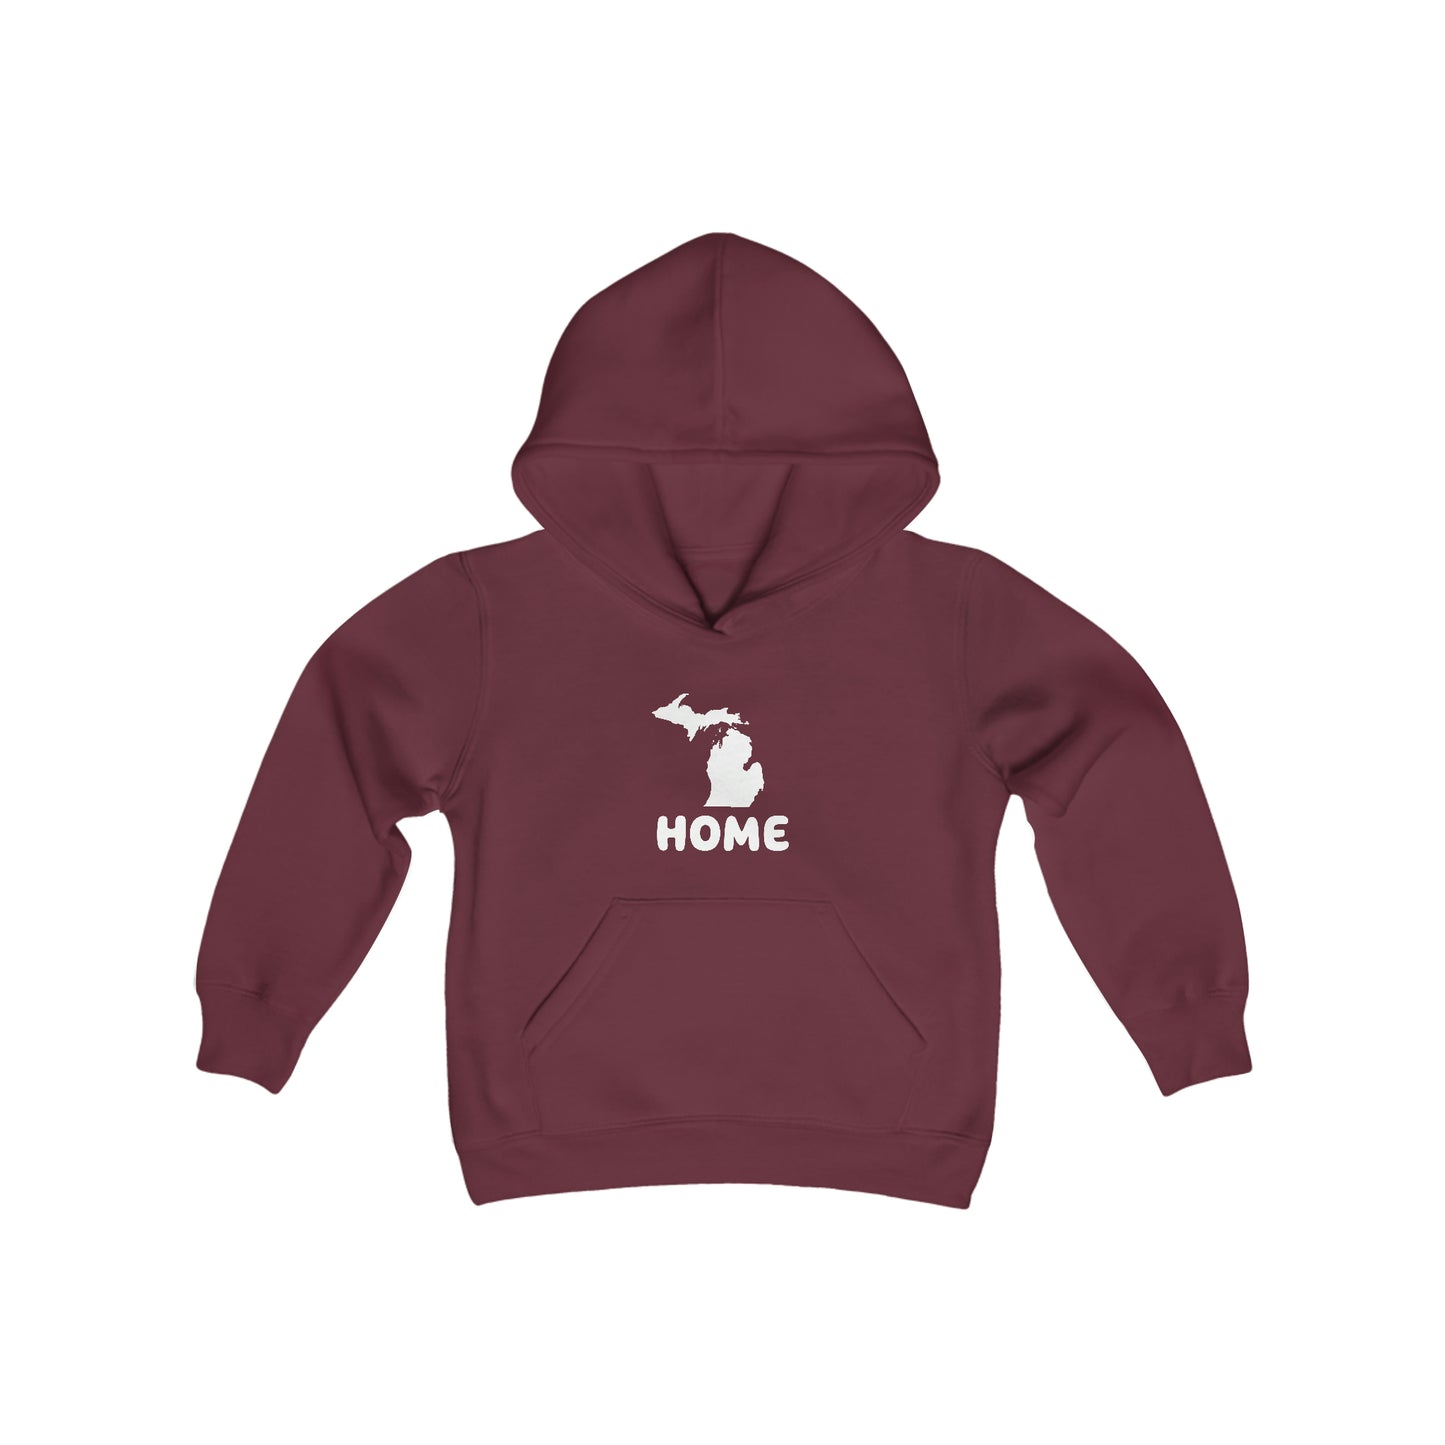 Michigan 'Home' Hoodie (Rounded Children's Font) | Unisex Youth